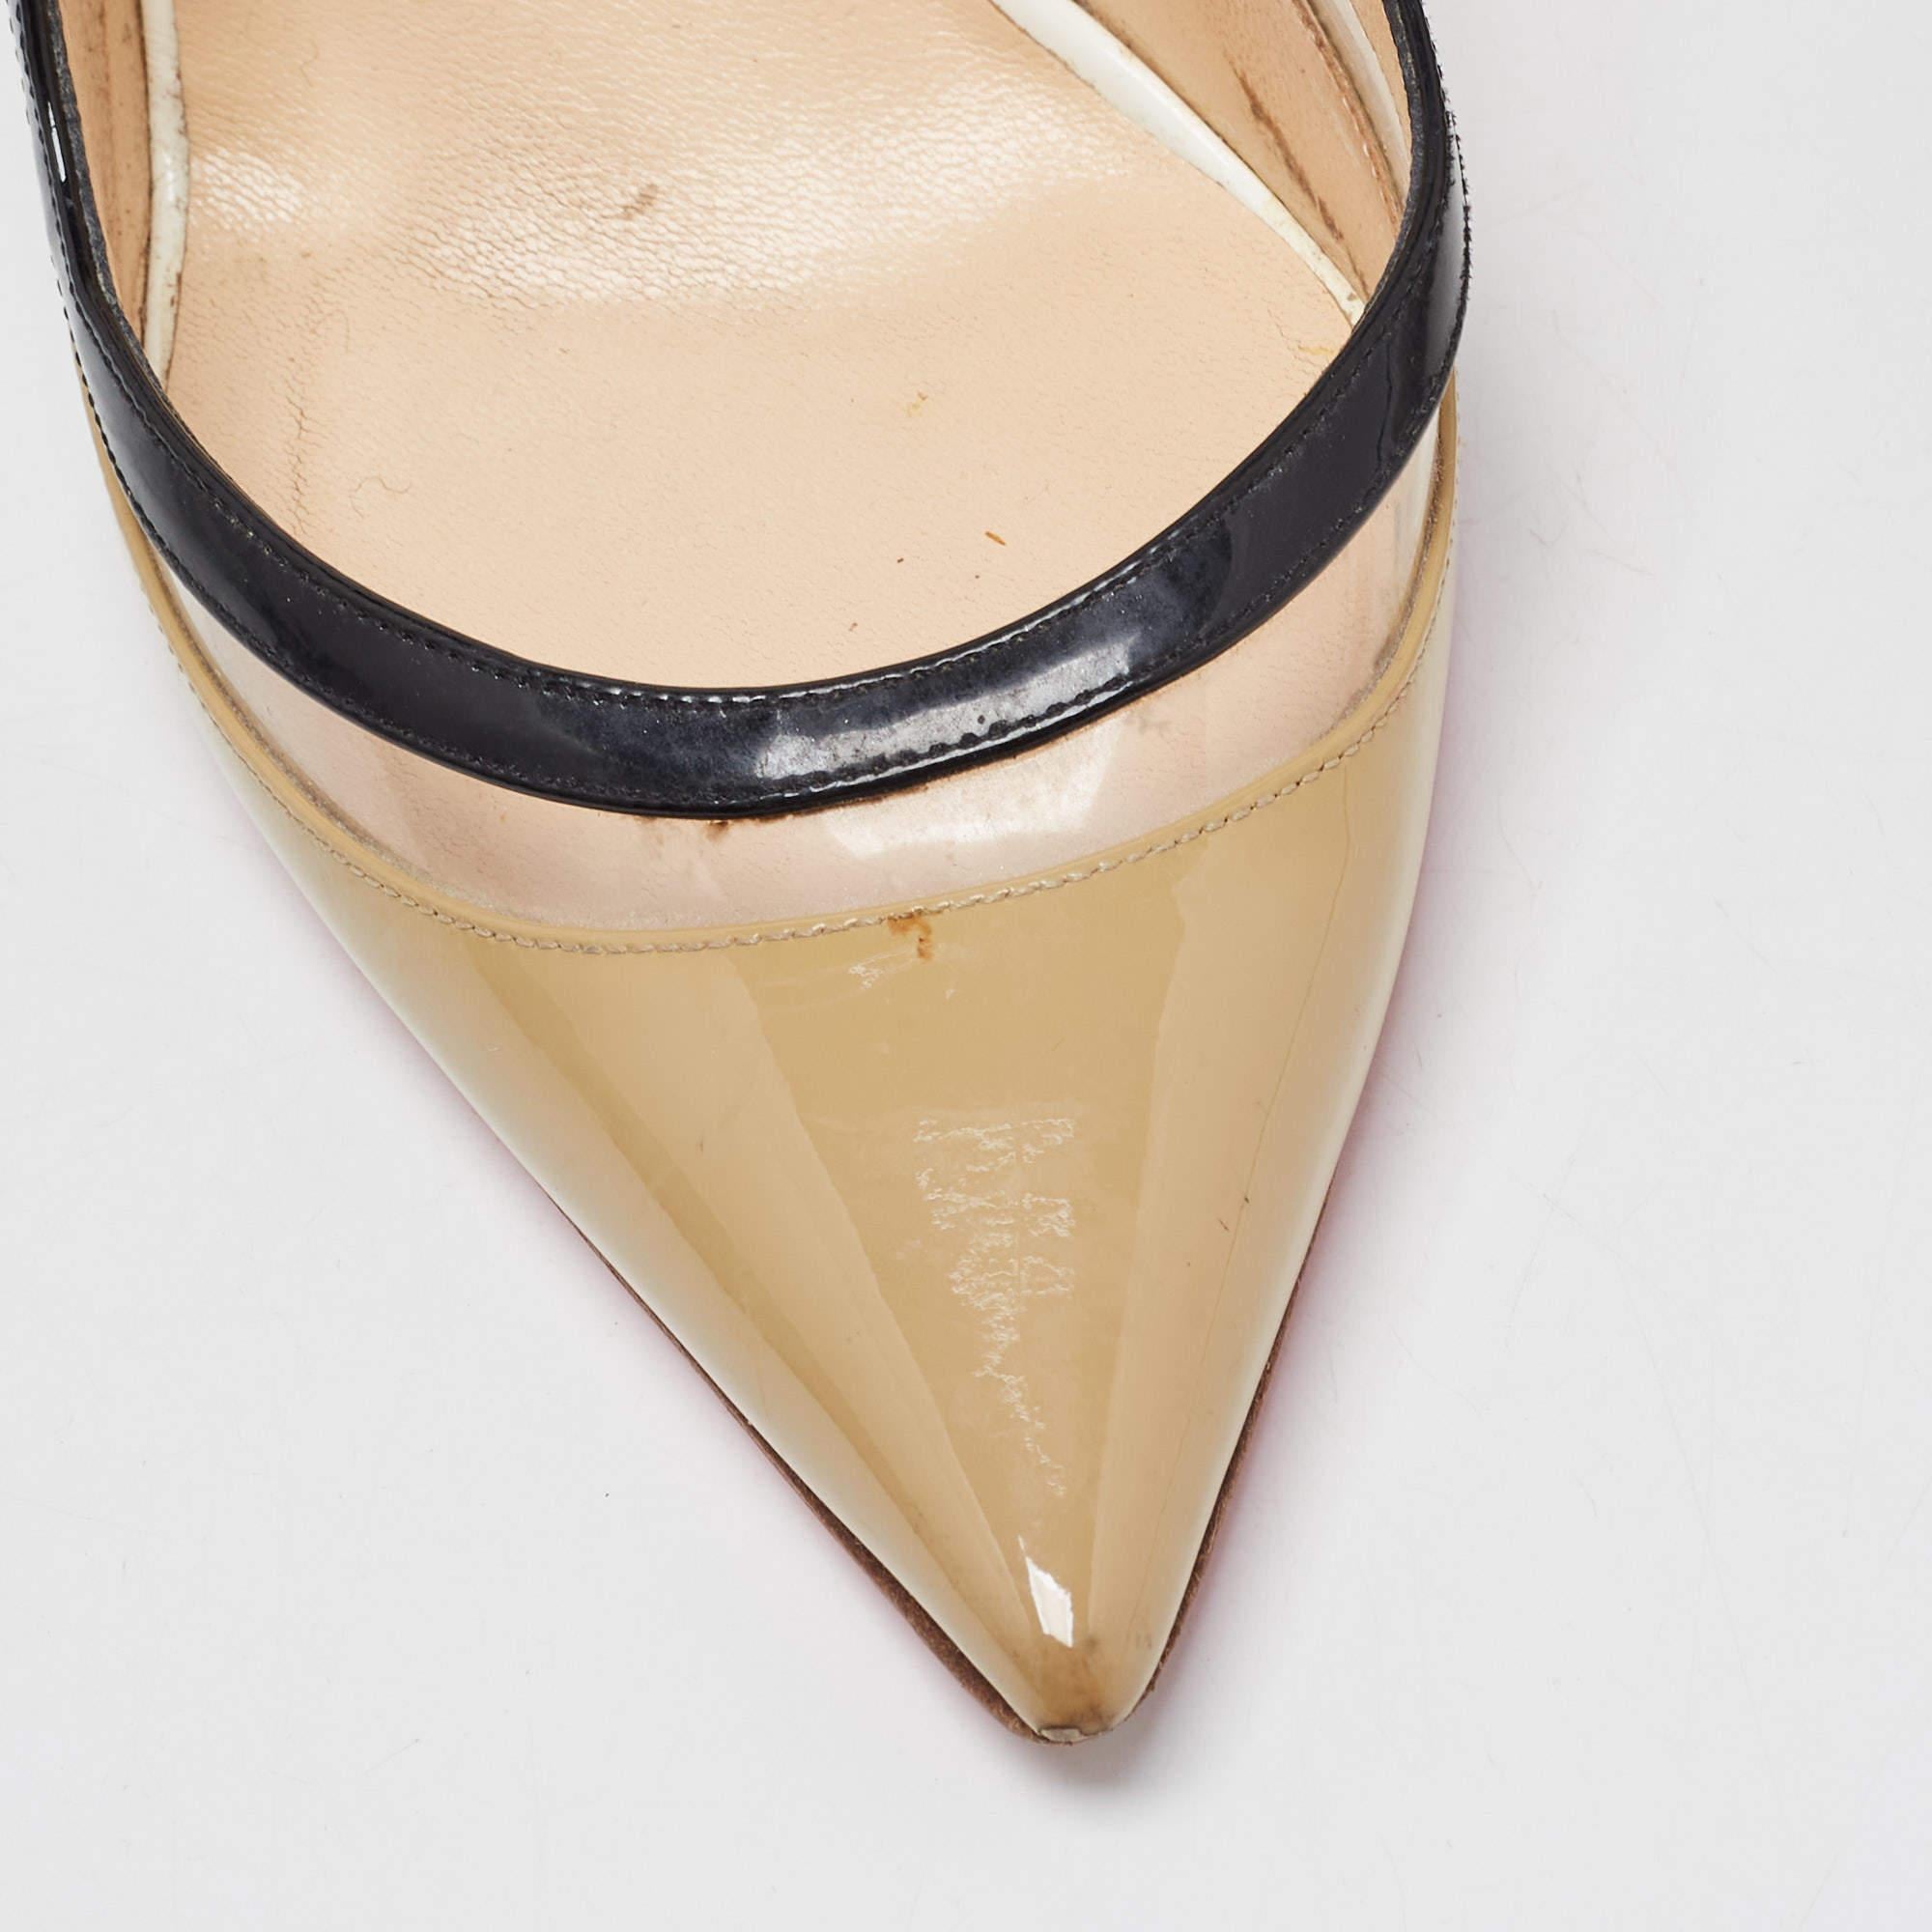 Christian Louboutin Tricolor Patent Leather and PVC Paulina Slingback Pumps Size For Sale 4